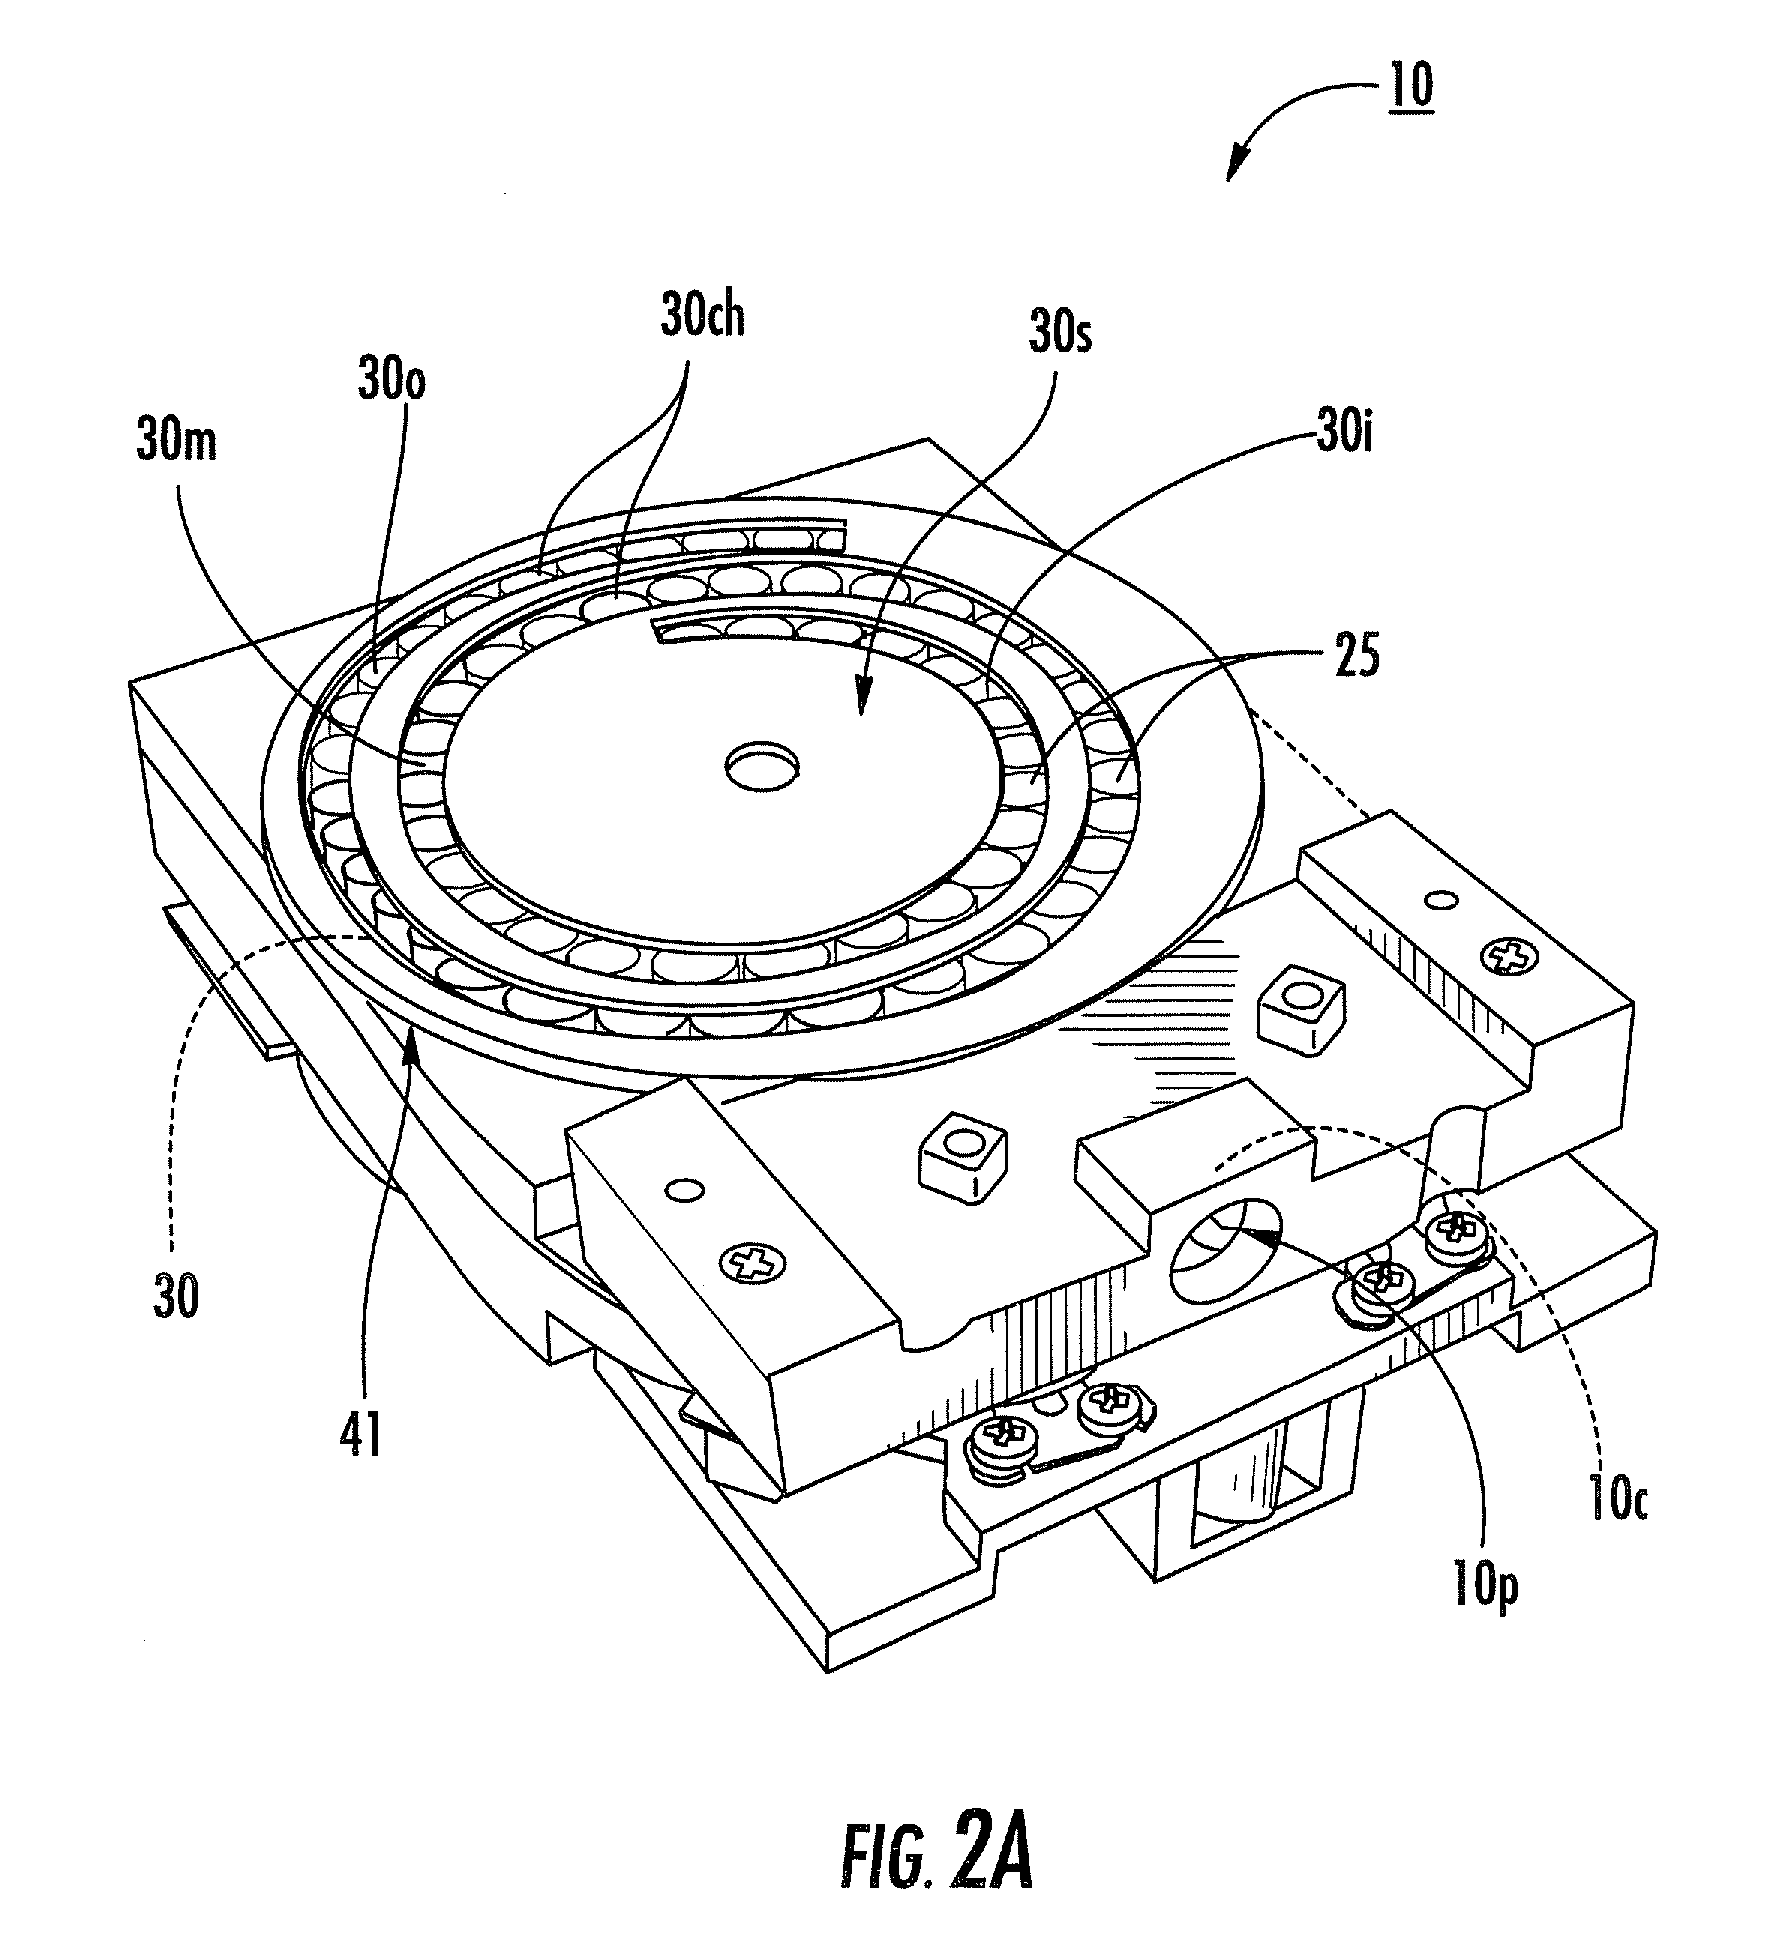 Dry powder inhalers having spiral travel paths, unit dose microcartridges with dry powder, related devices and methods